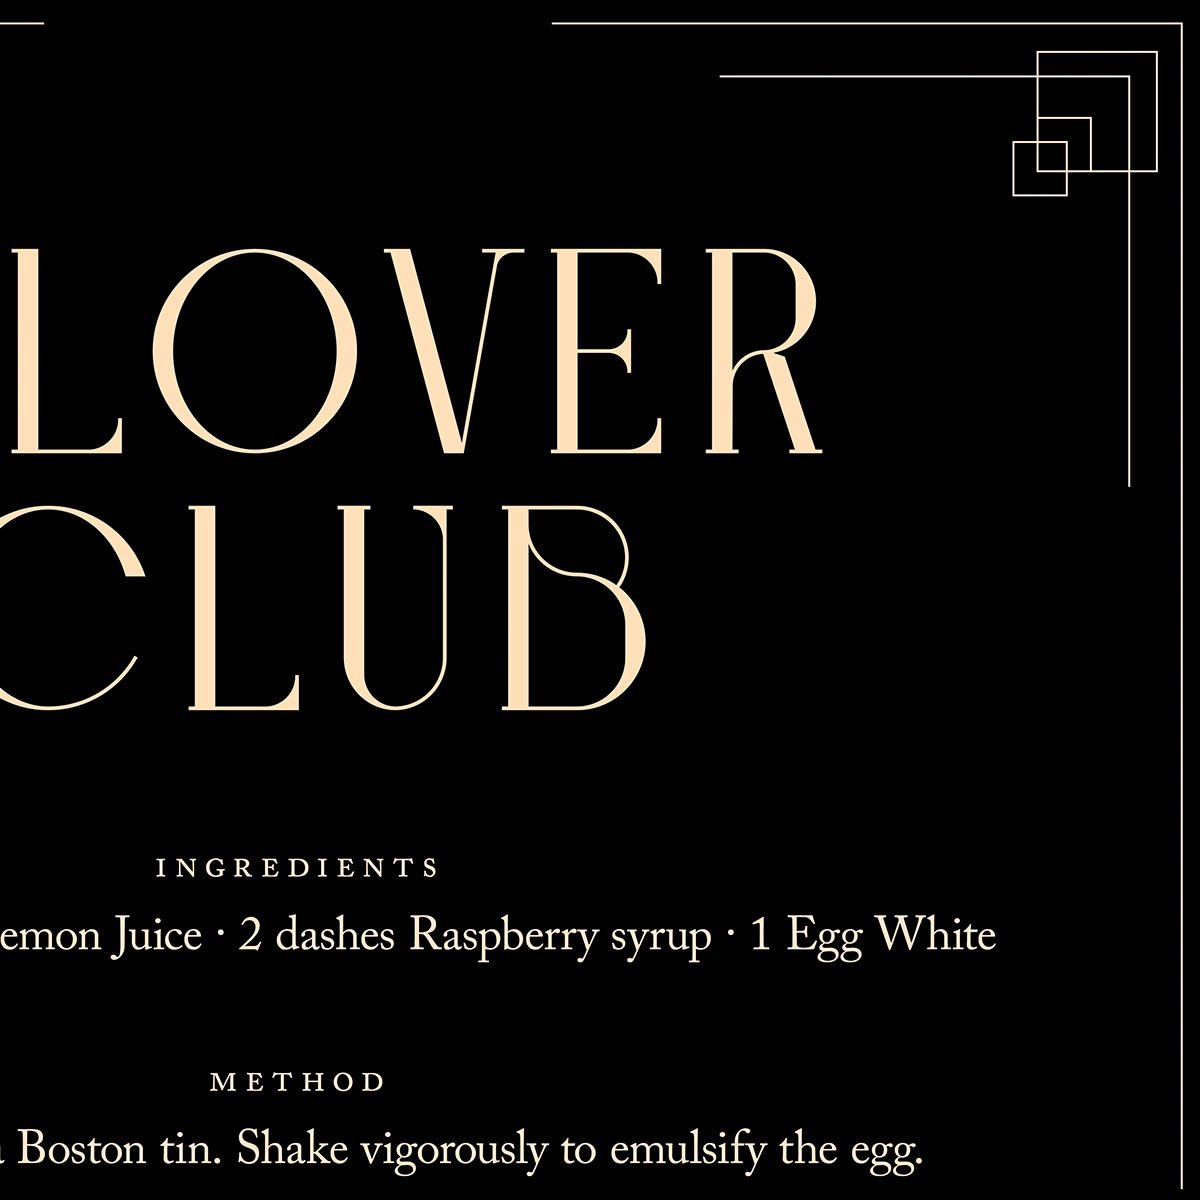 Clover Club Cocktail Recipe Poster